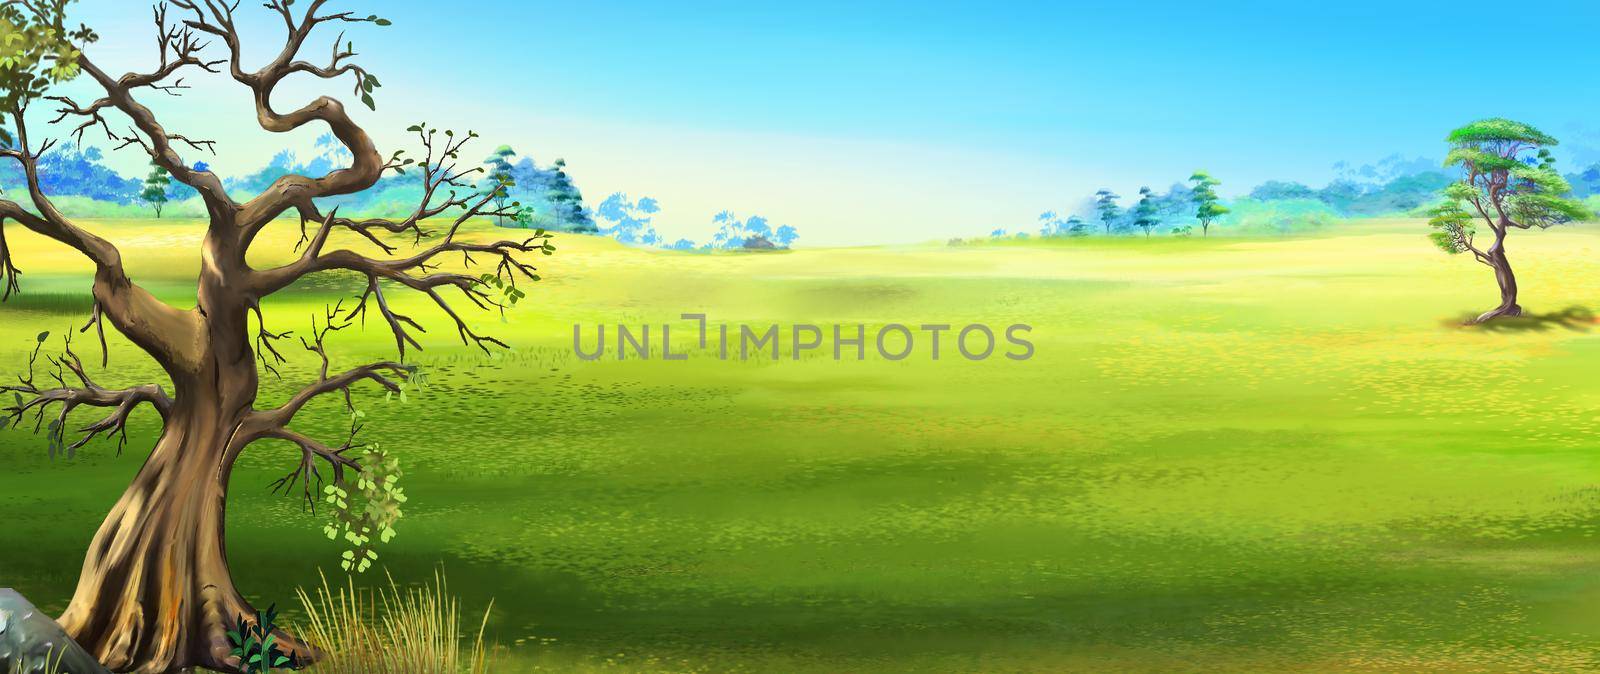 Big tree on the background of the steppe landscape. Digital Painting Background, Illustration.